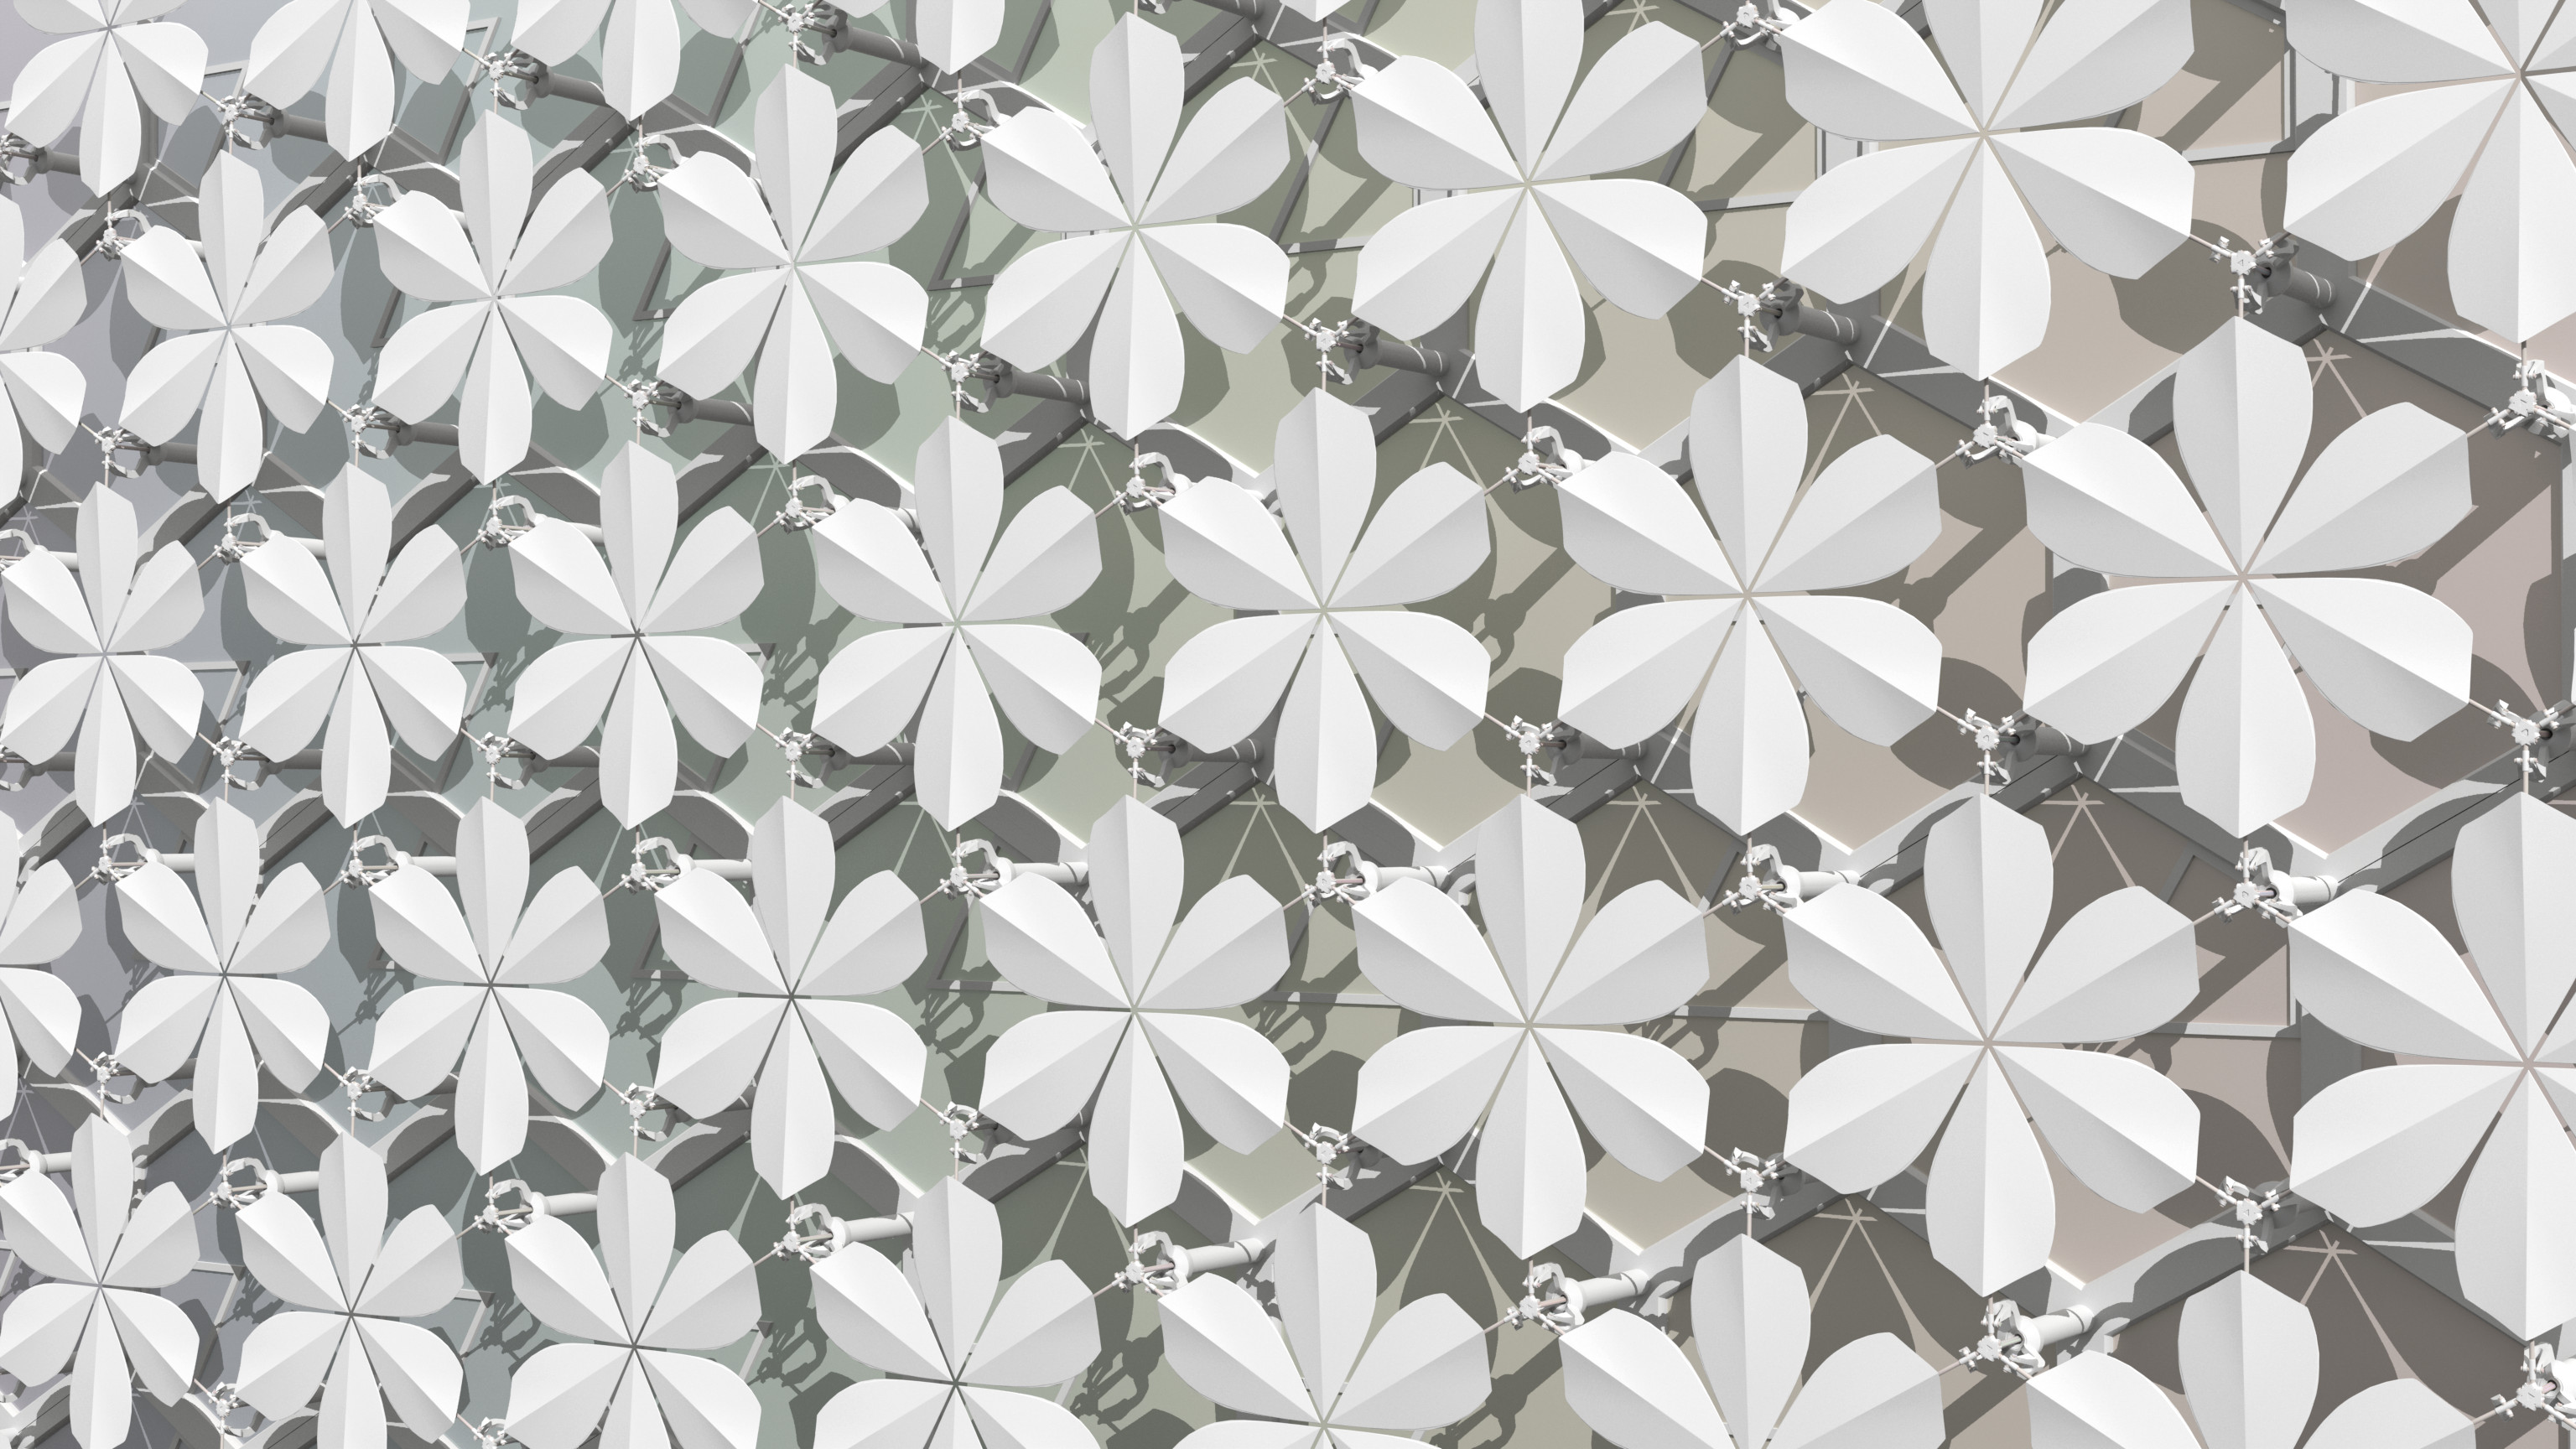 Flower scales 60º alignment: full shading over hexagonal static façade; on discovering that to avoid interference I needed to trim the back edges, I decided to consciously invoke biomorphic influences for both fit and æsthetics - I love this result.